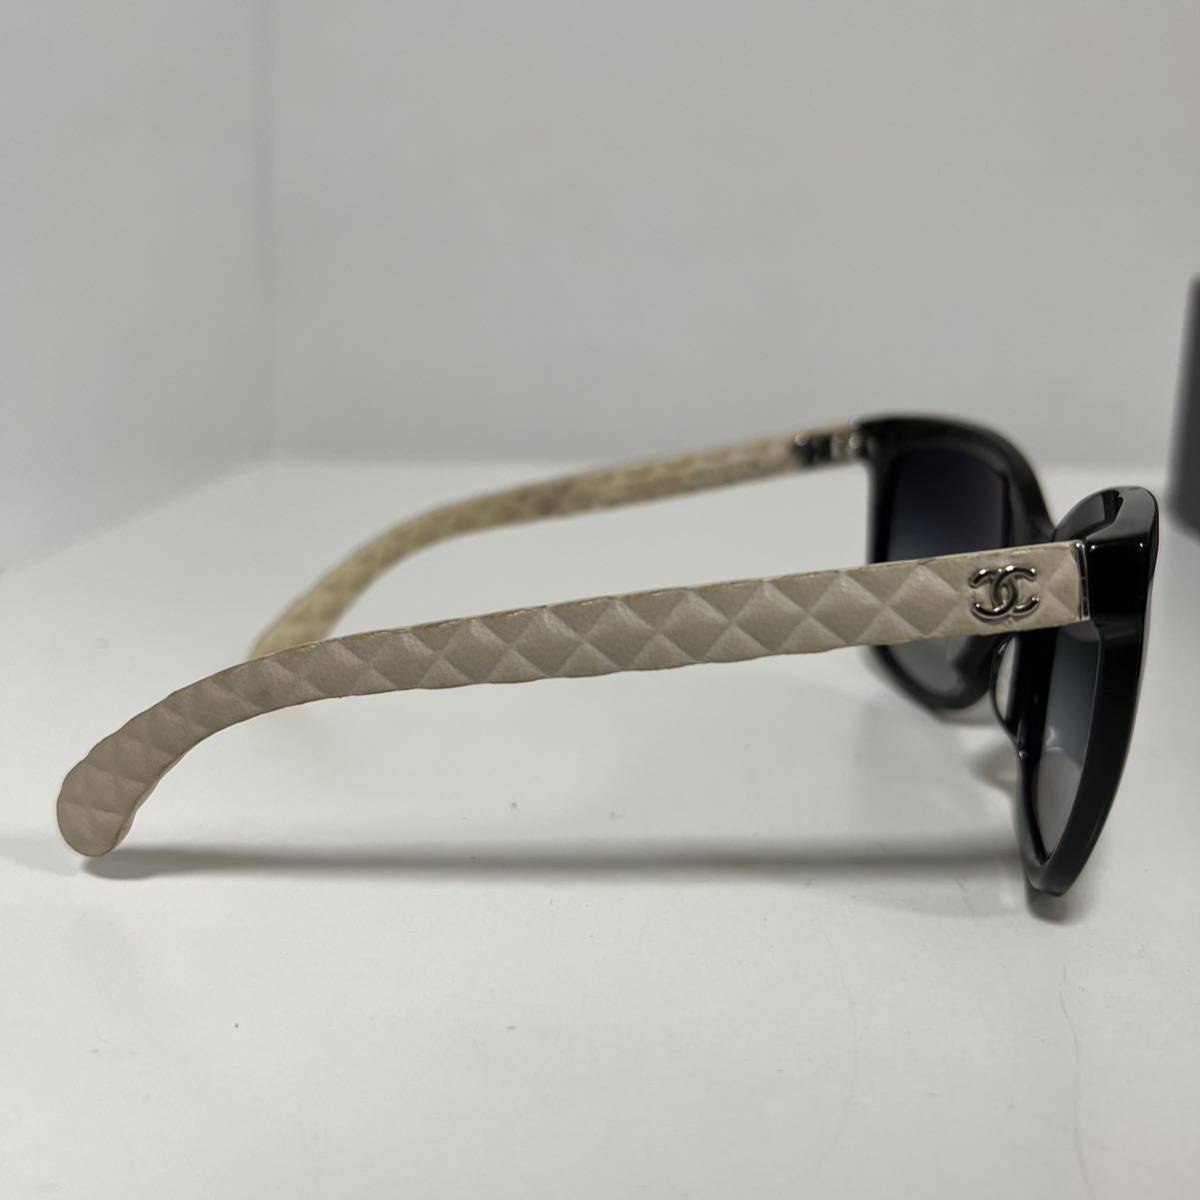 CHANEL Chanel sunglasses 5288-Q-A here Mark matelasse quilting motif black ivory used 